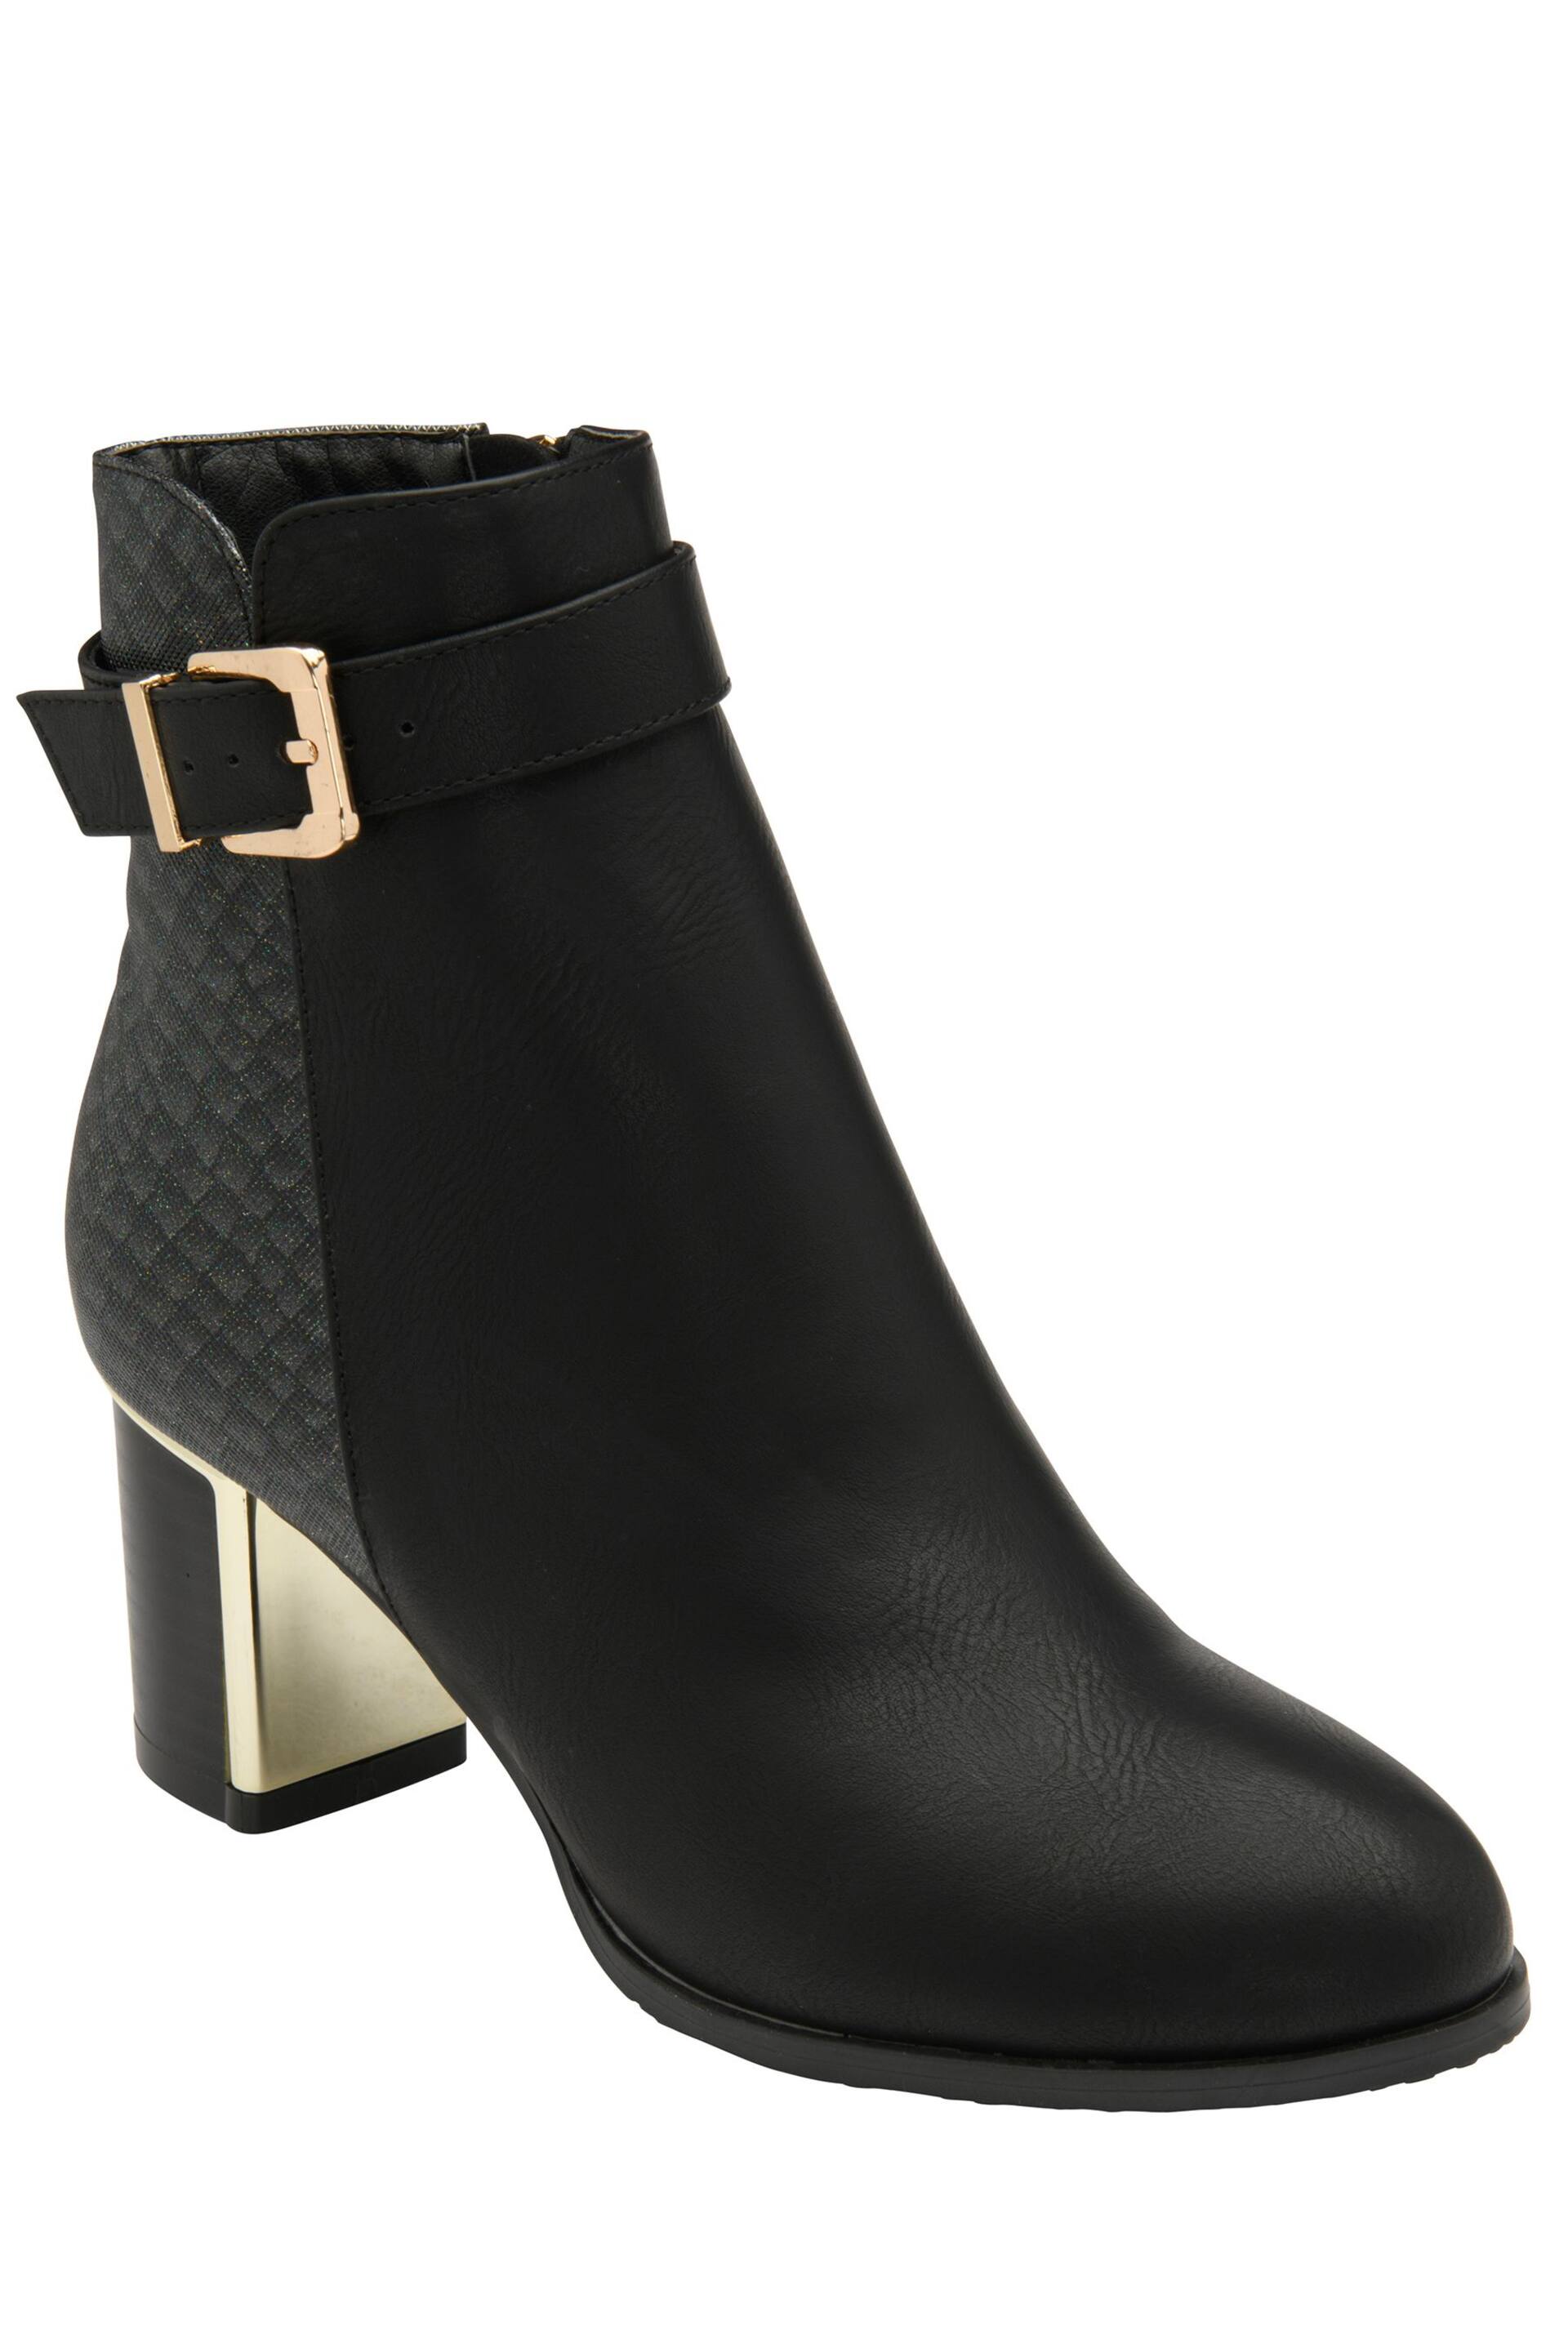 Lotus Black chrome Ankle Boots - Image 1 of 4